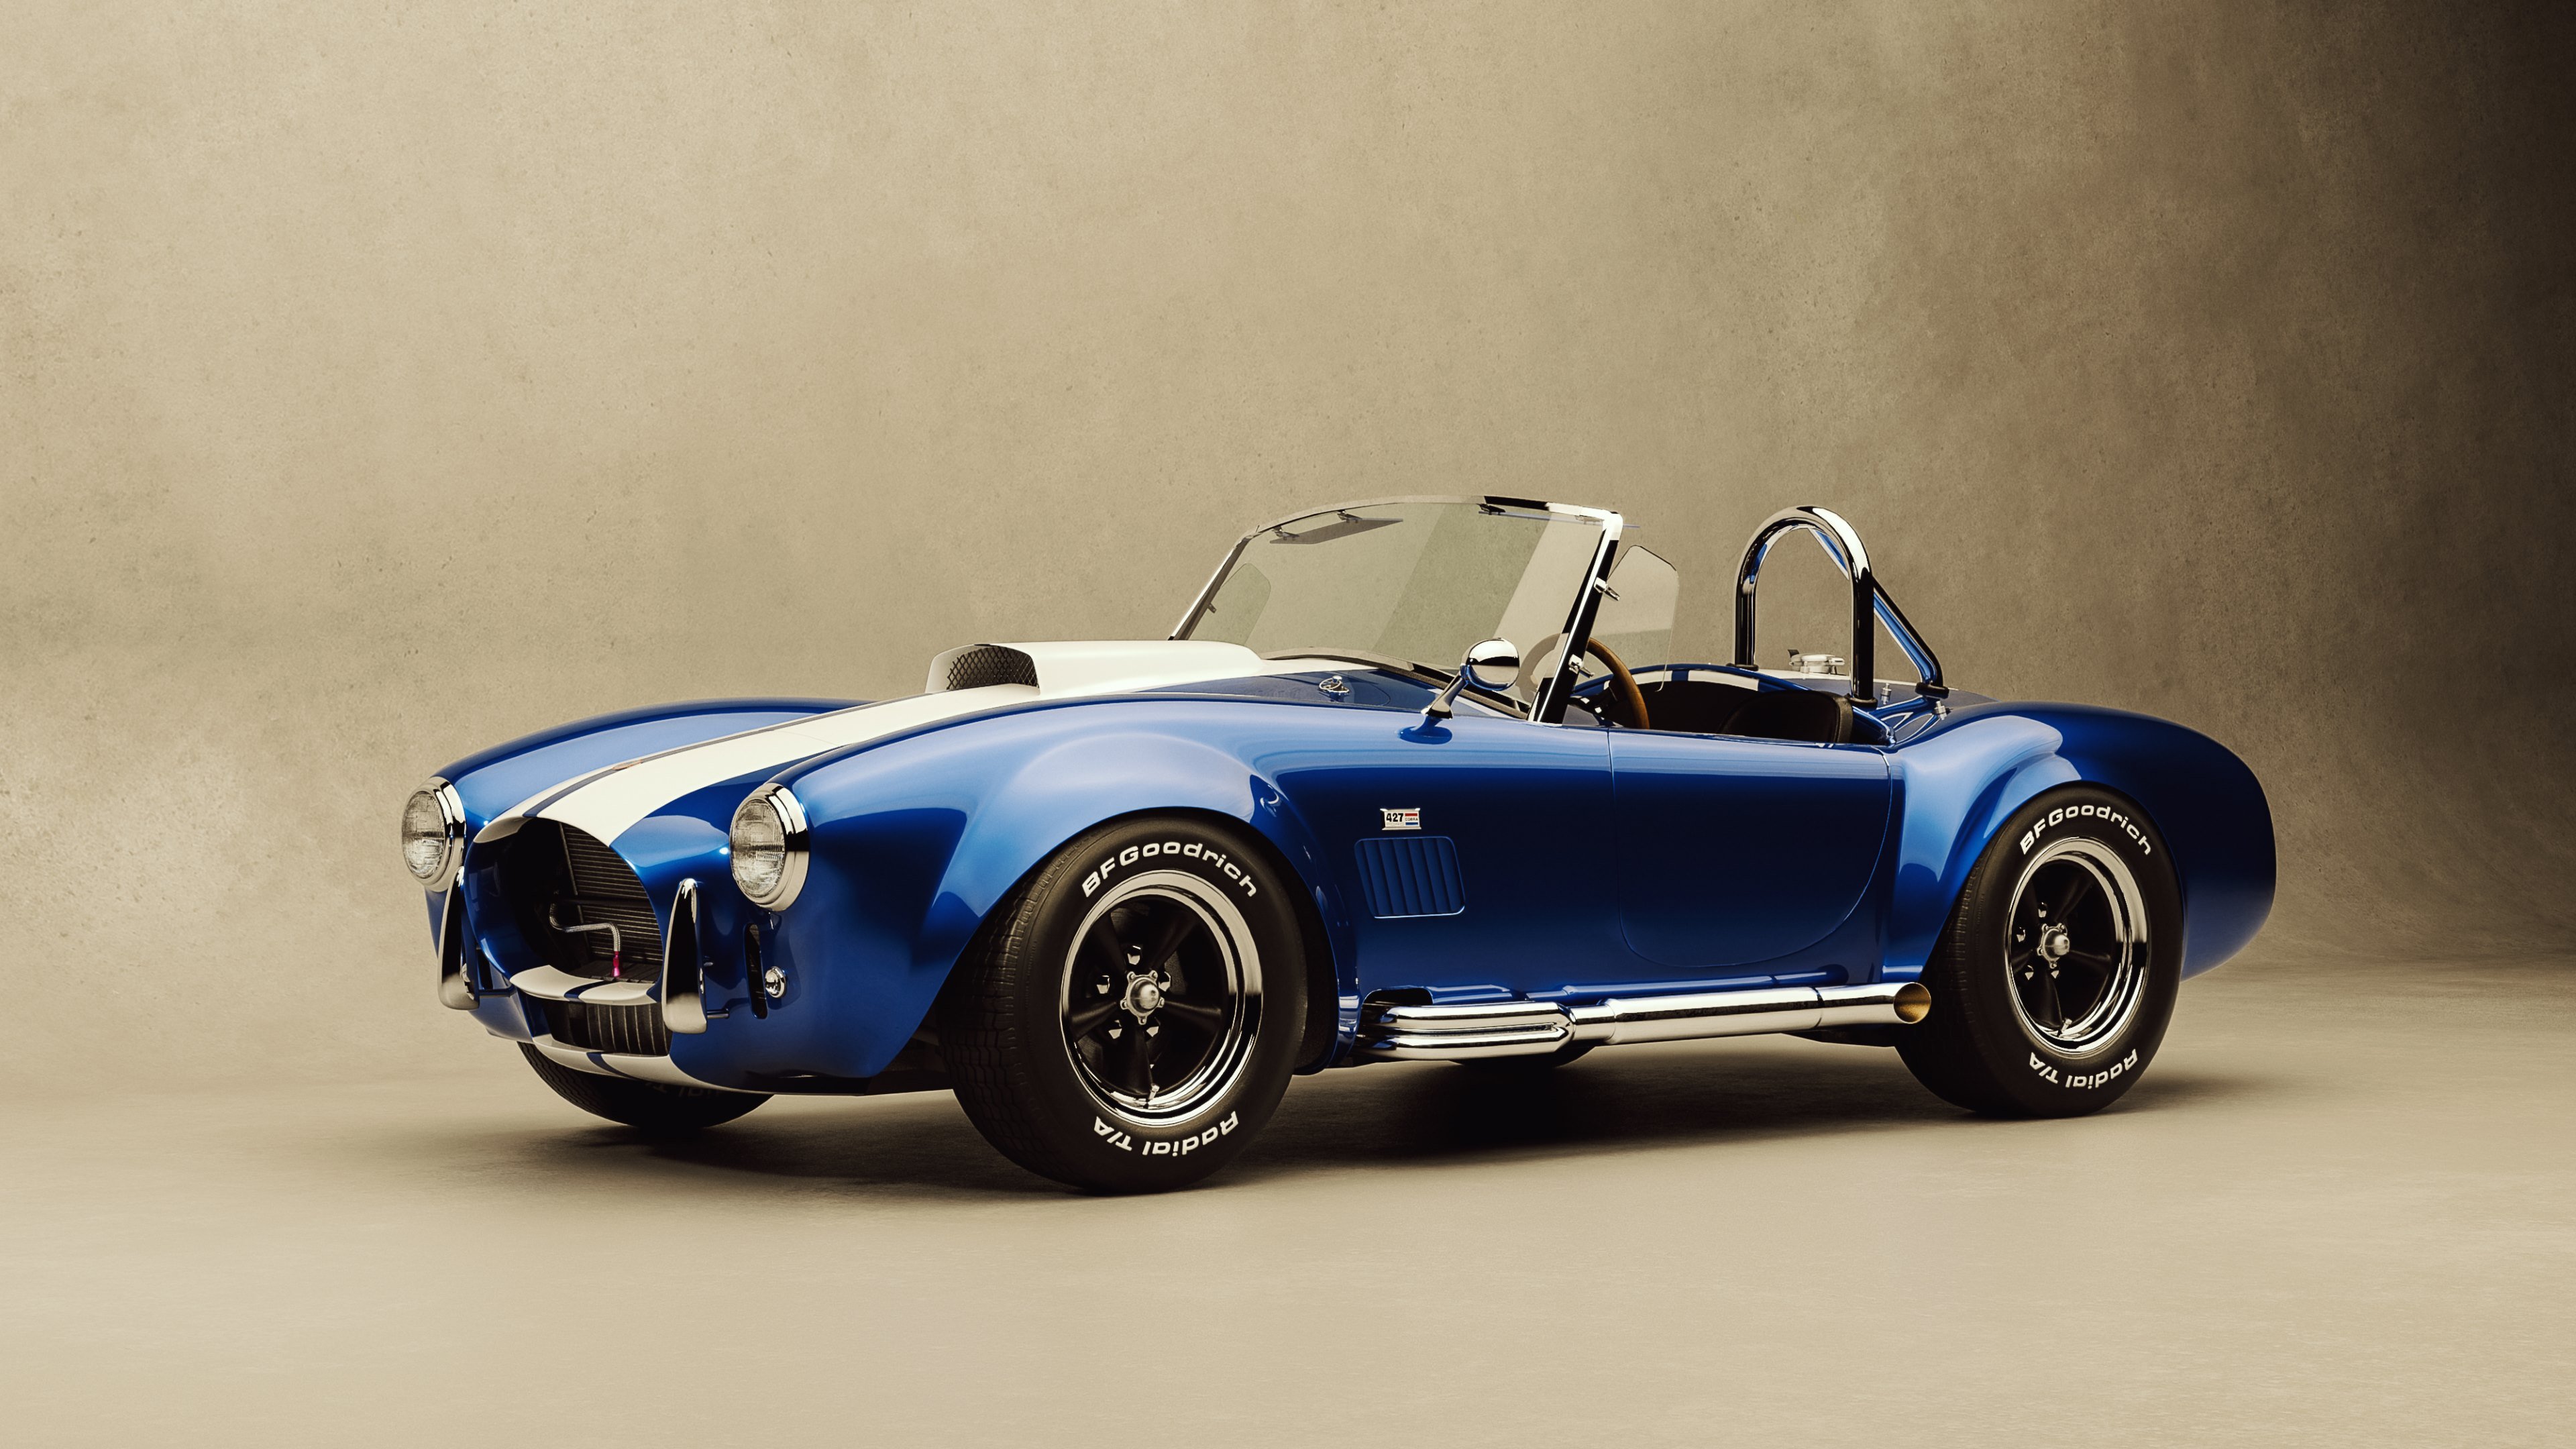  Car Vintage Ford Shelby Cobra 427 HD Wallpapers 4K Wallpapers 3840x2160